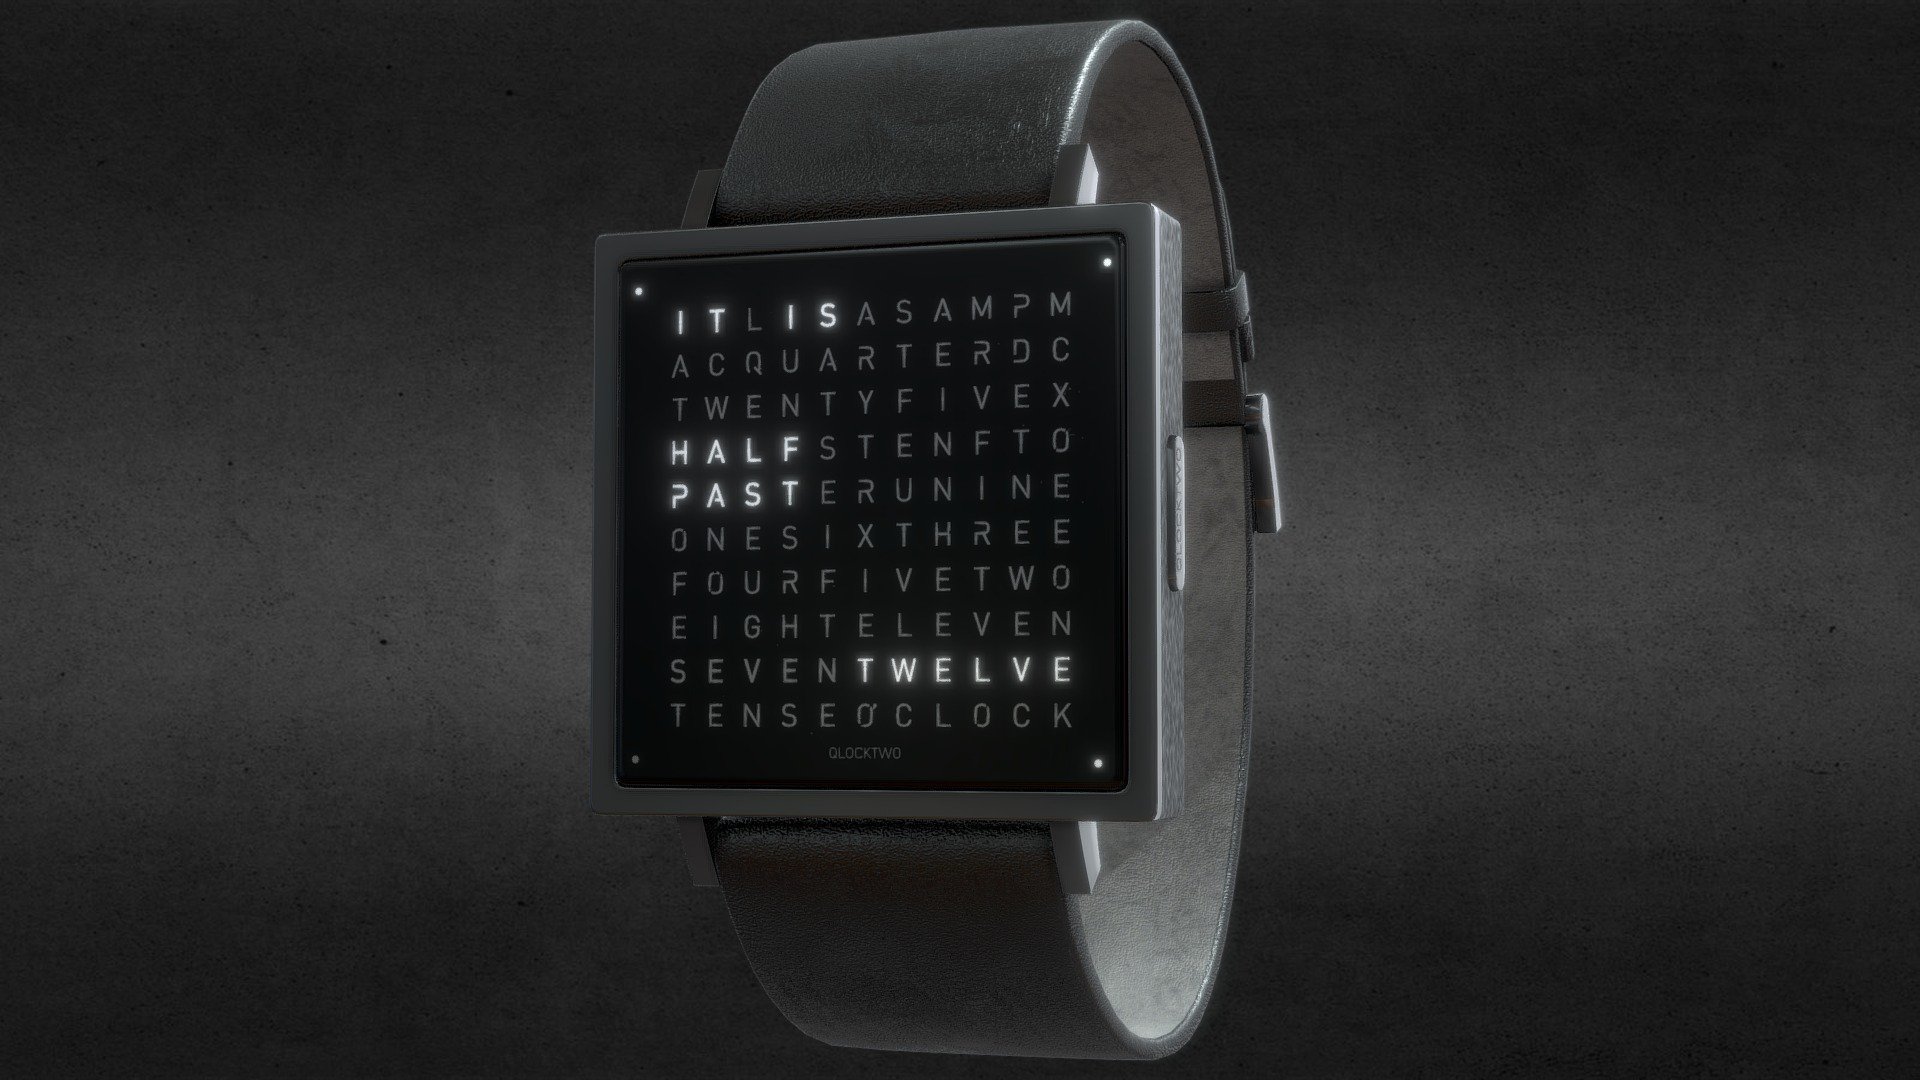 Awesome stainless steel Qlocktwo W Watch watch․
Use for Unreal Engine 4 and Unity3D. Try in augmented reality in the AR-Watches app. 
Links to the app: Android, iOS

Currently available for download in FBX format.

3D model developed by AR-Watches

Disclaimer: We do not own the design of the watch, we only made the 3D model 3d model